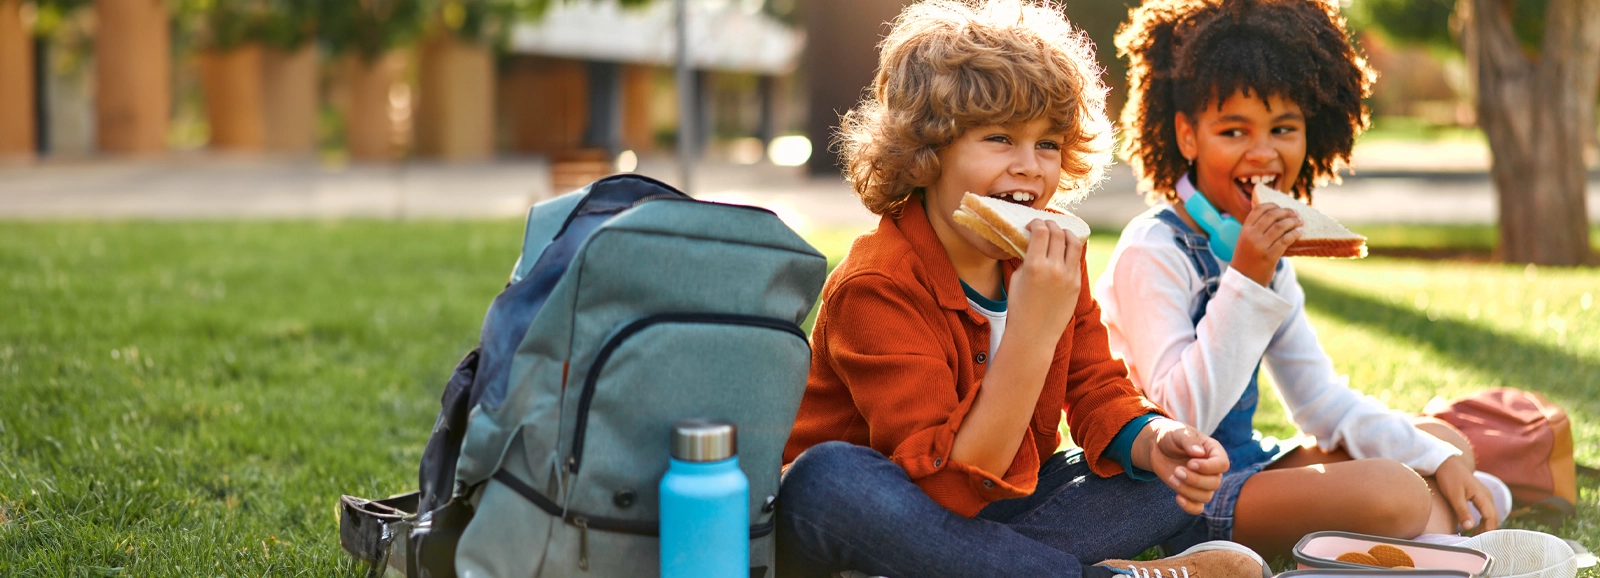 kids-eating-packed-lunches-1600x578-2_rev.webp